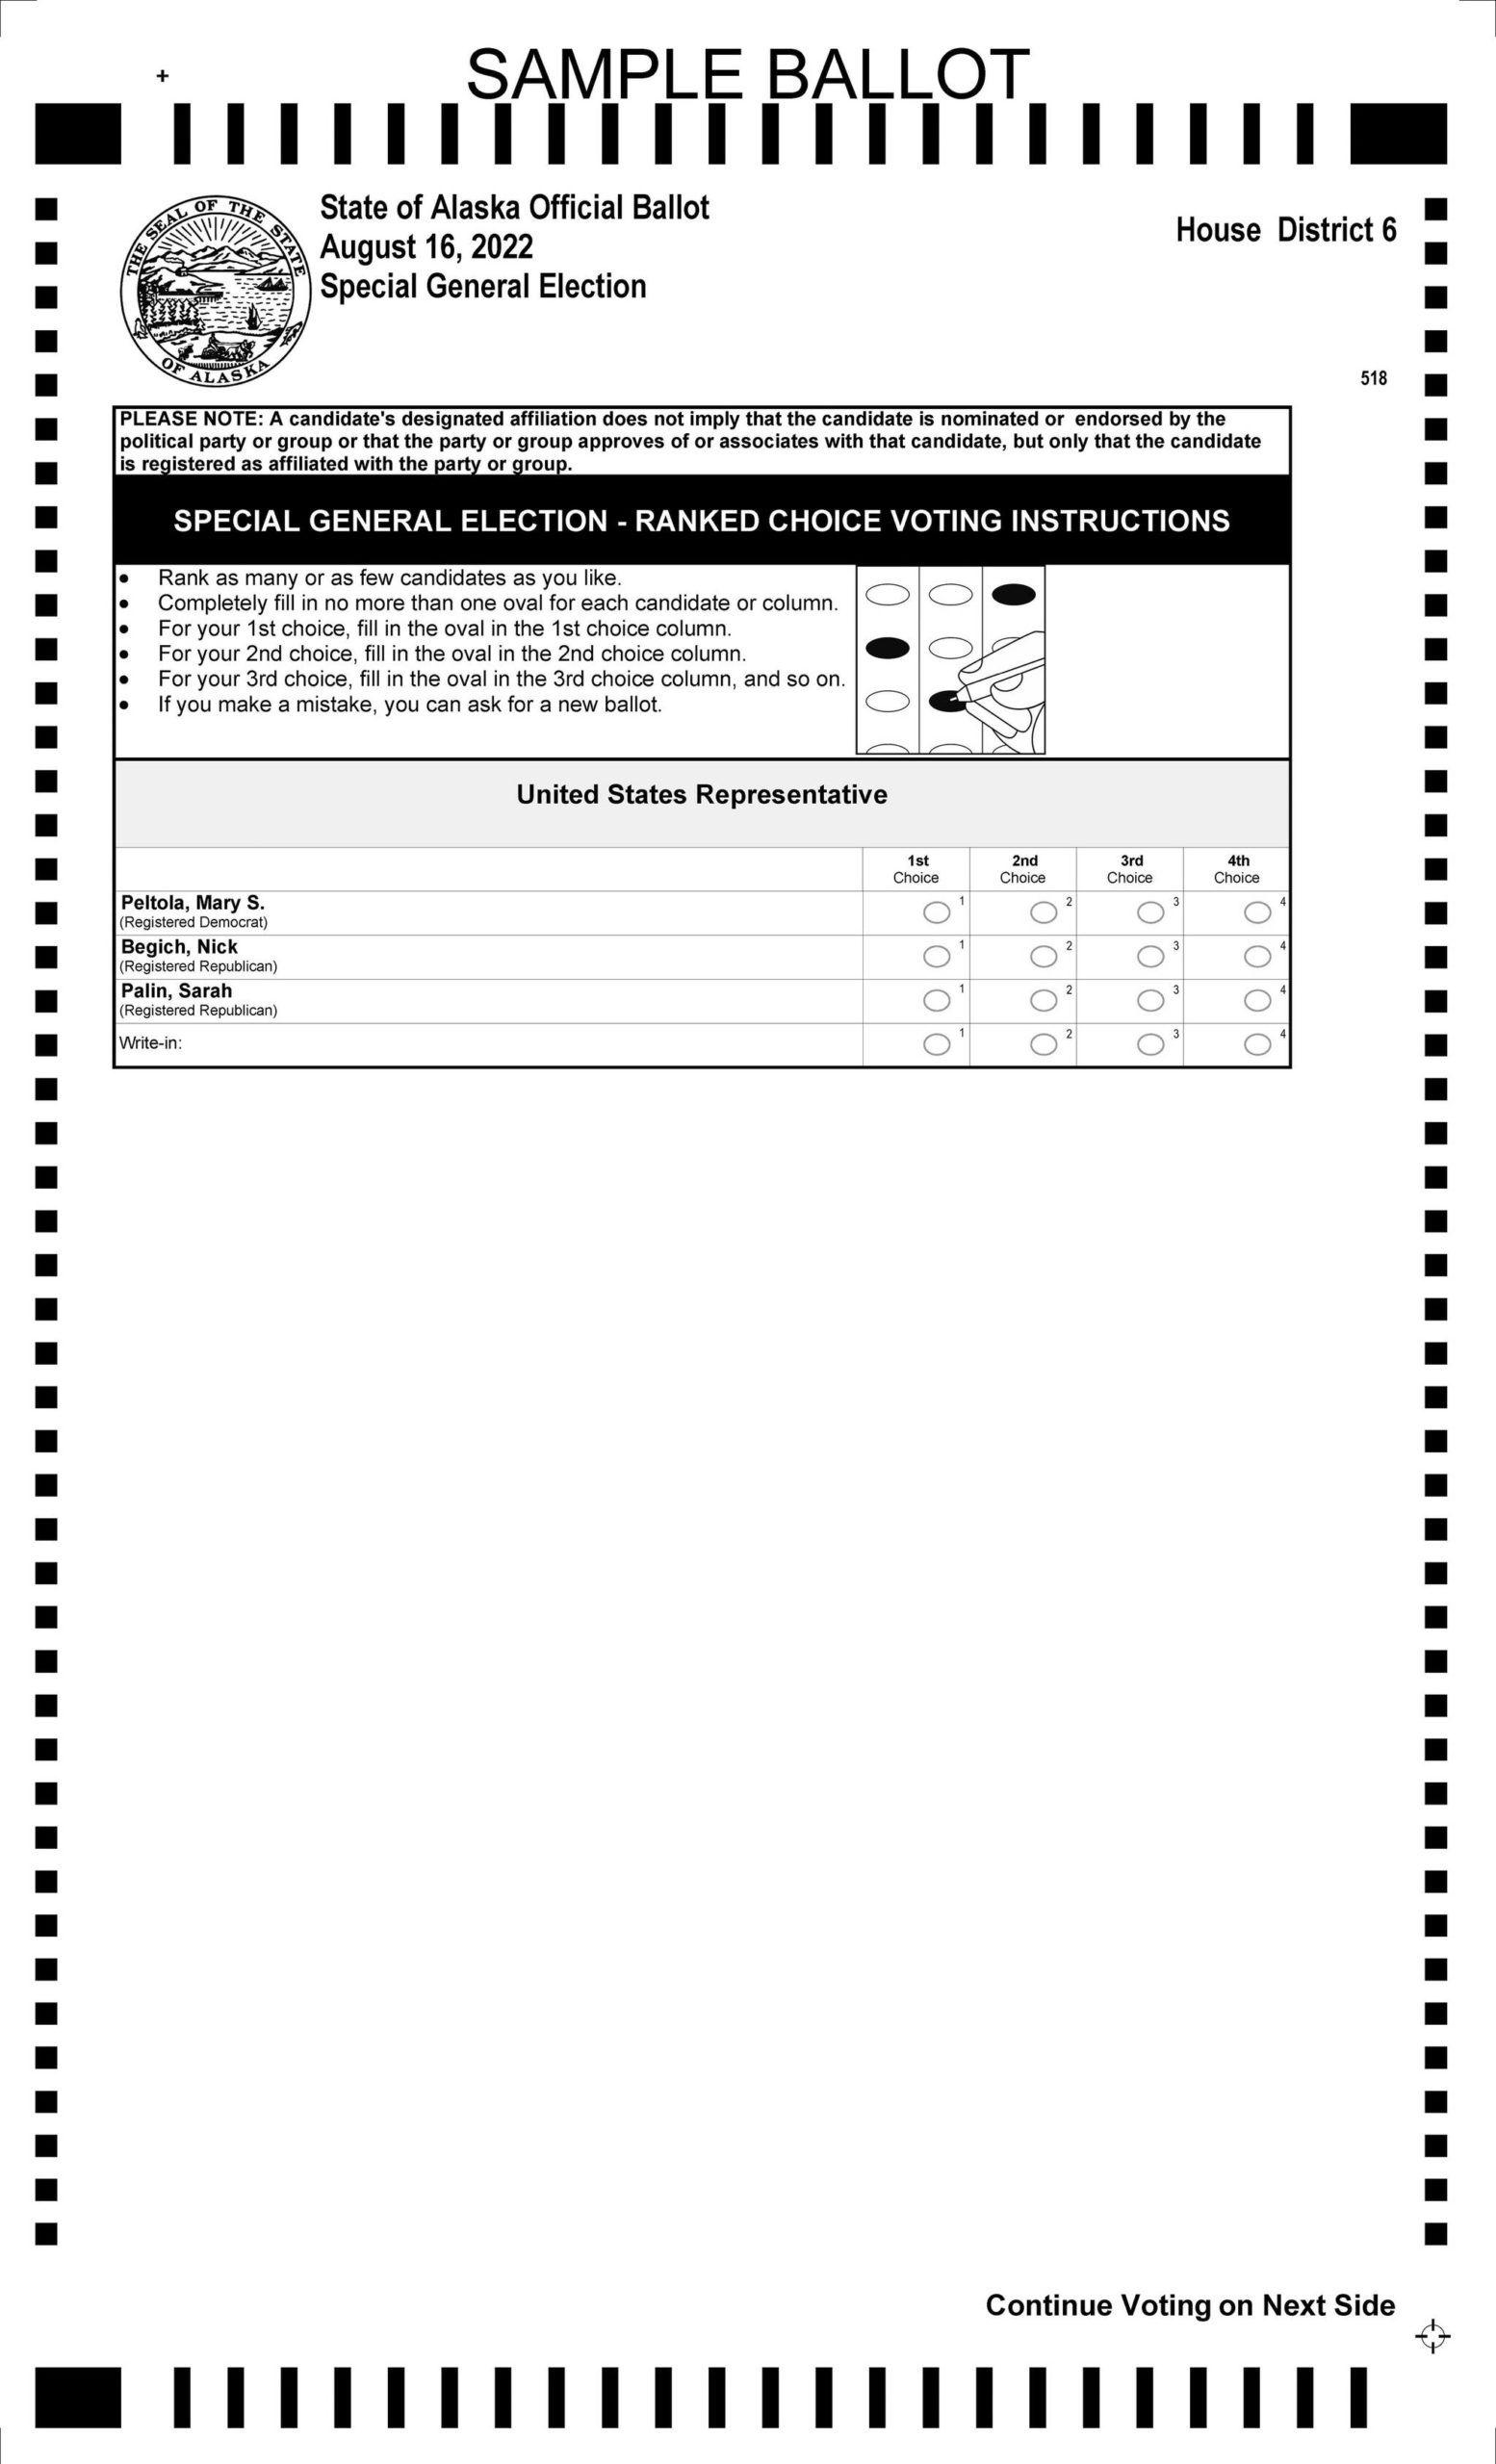 This sample ballot shows the special election race for U.S. Representative for the House District 6 election to be held on Tuesday, Aug. 16, 2022, on the Southern Kenai Peninsula. The special election is the first time Alaskans will use ranked-choice rating, where they can rank first, second or third the candidates. (Courtesy Alaska Division of Elections)